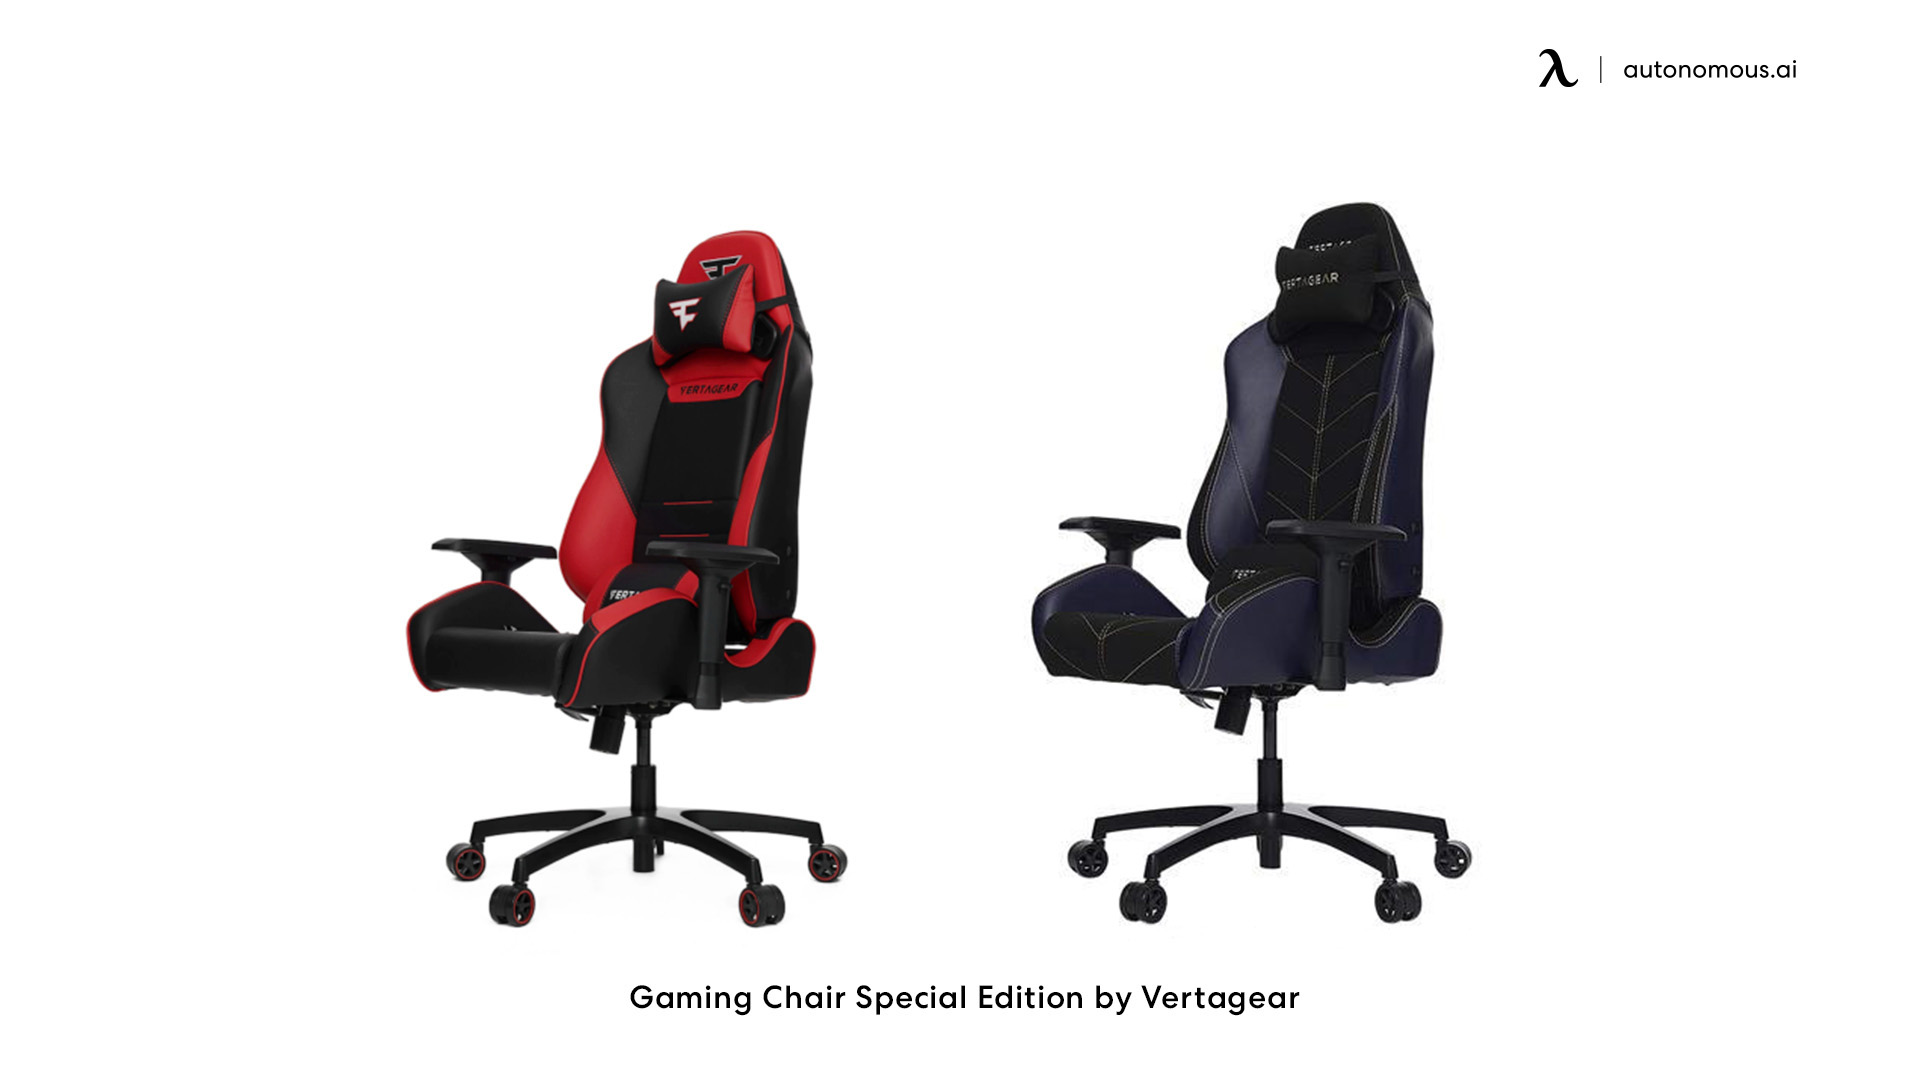 Gaming chair special edition by Vertagear